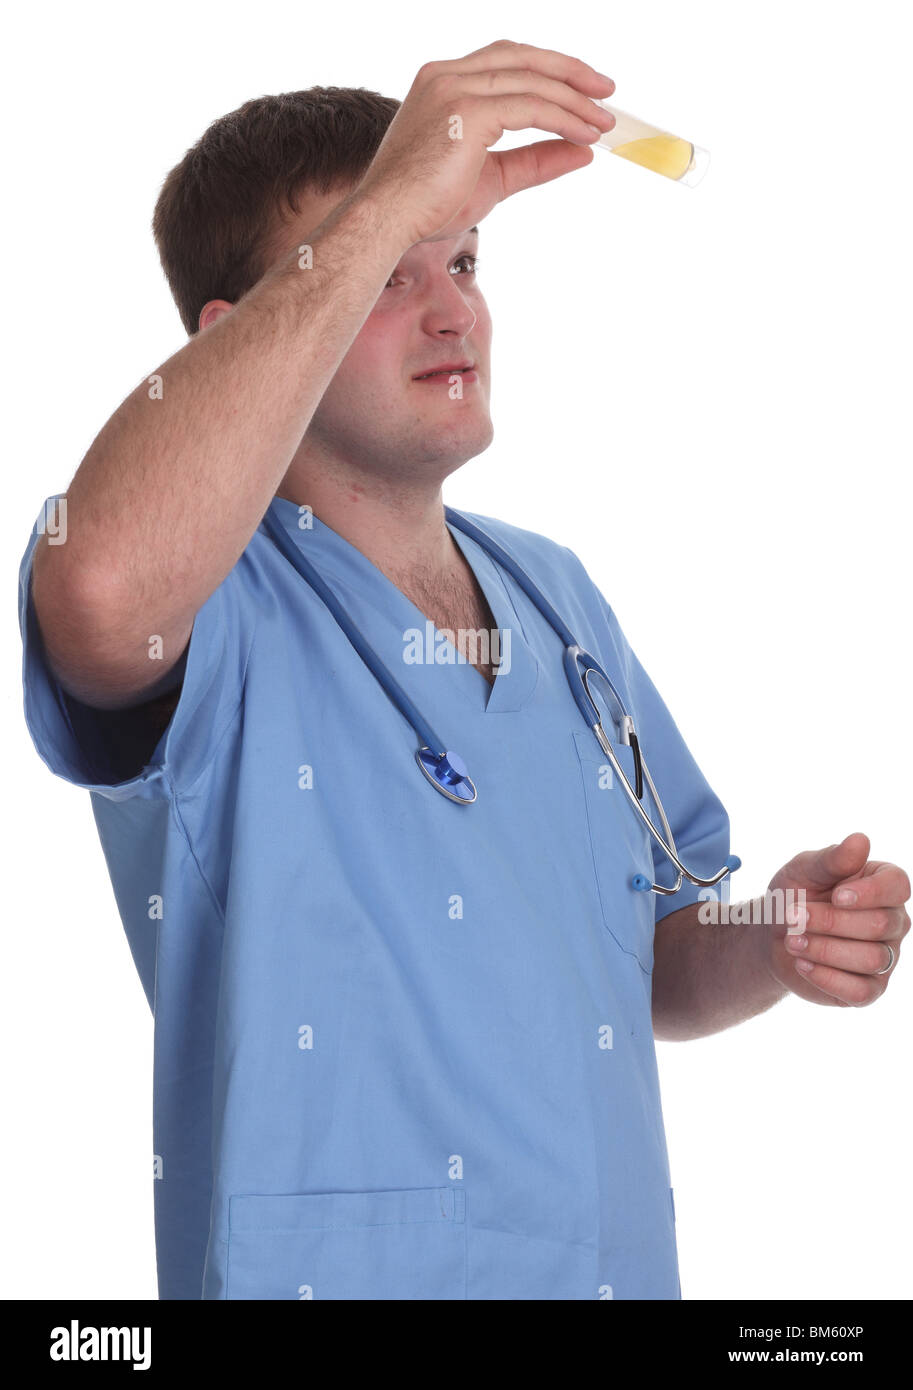 May 2010 - Young male model in medical scrubs as a male nurse, Stock Photo